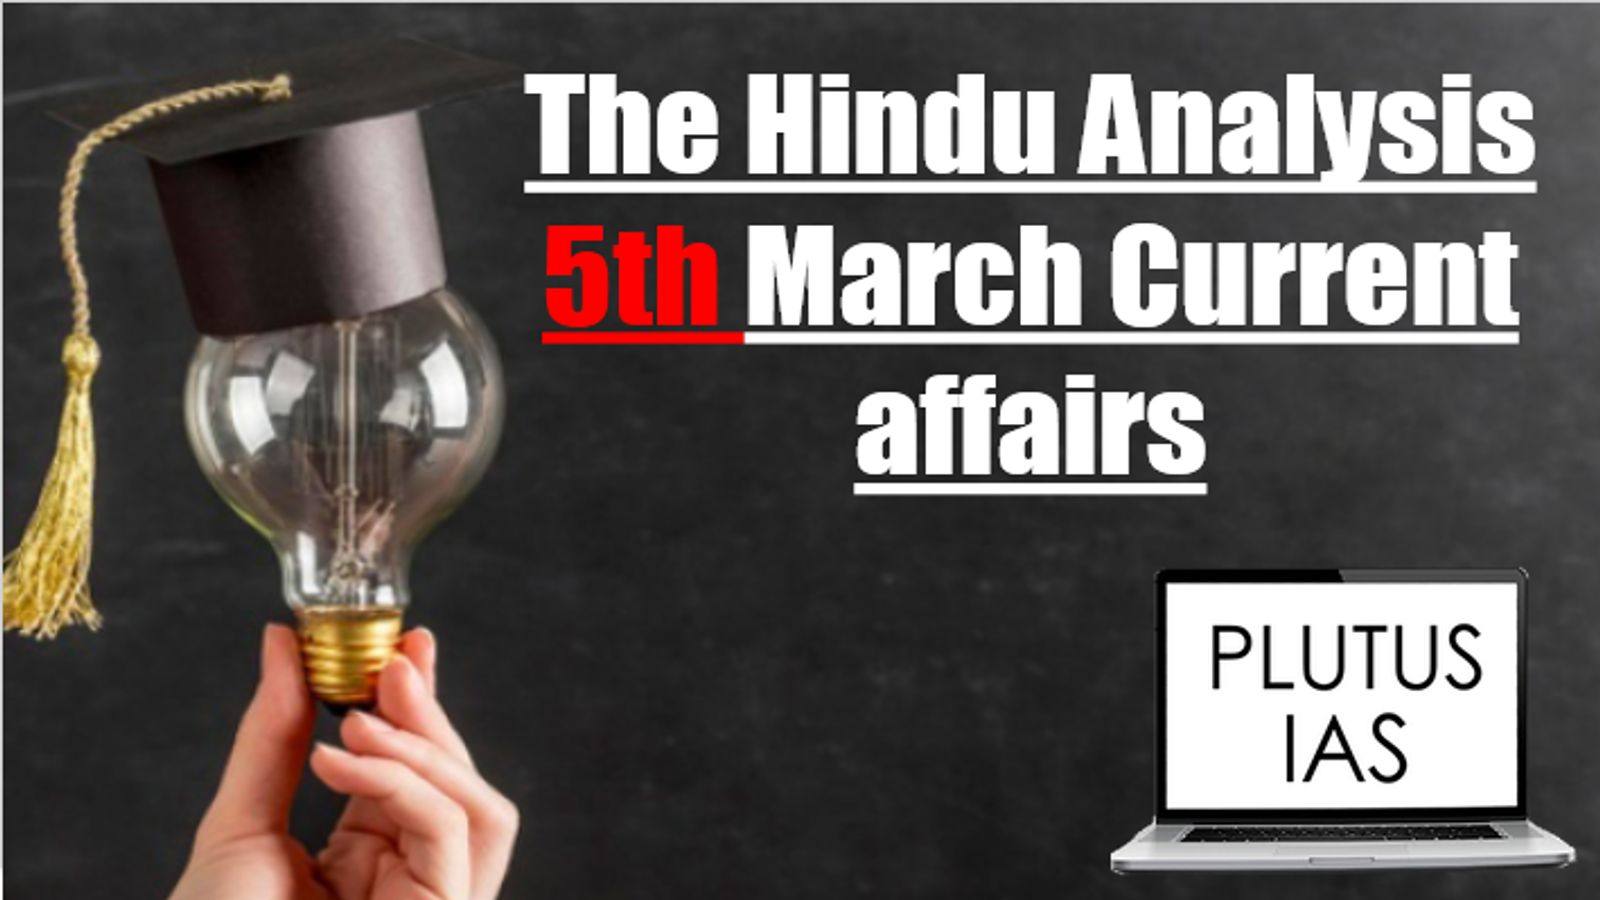 The Hindu Analysis 5th March